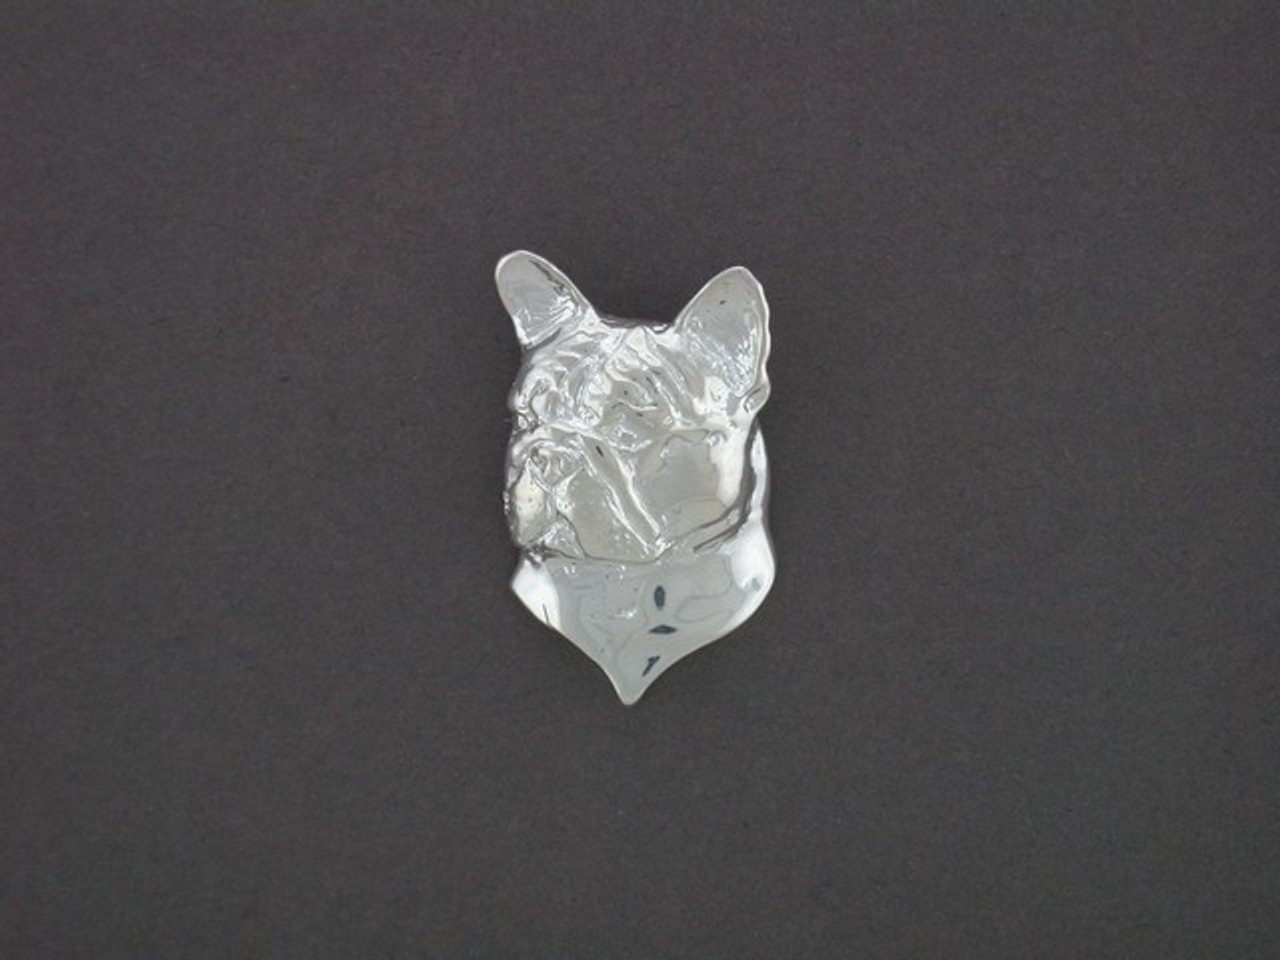 French Bull Dog 3 4 View Med L Pendant